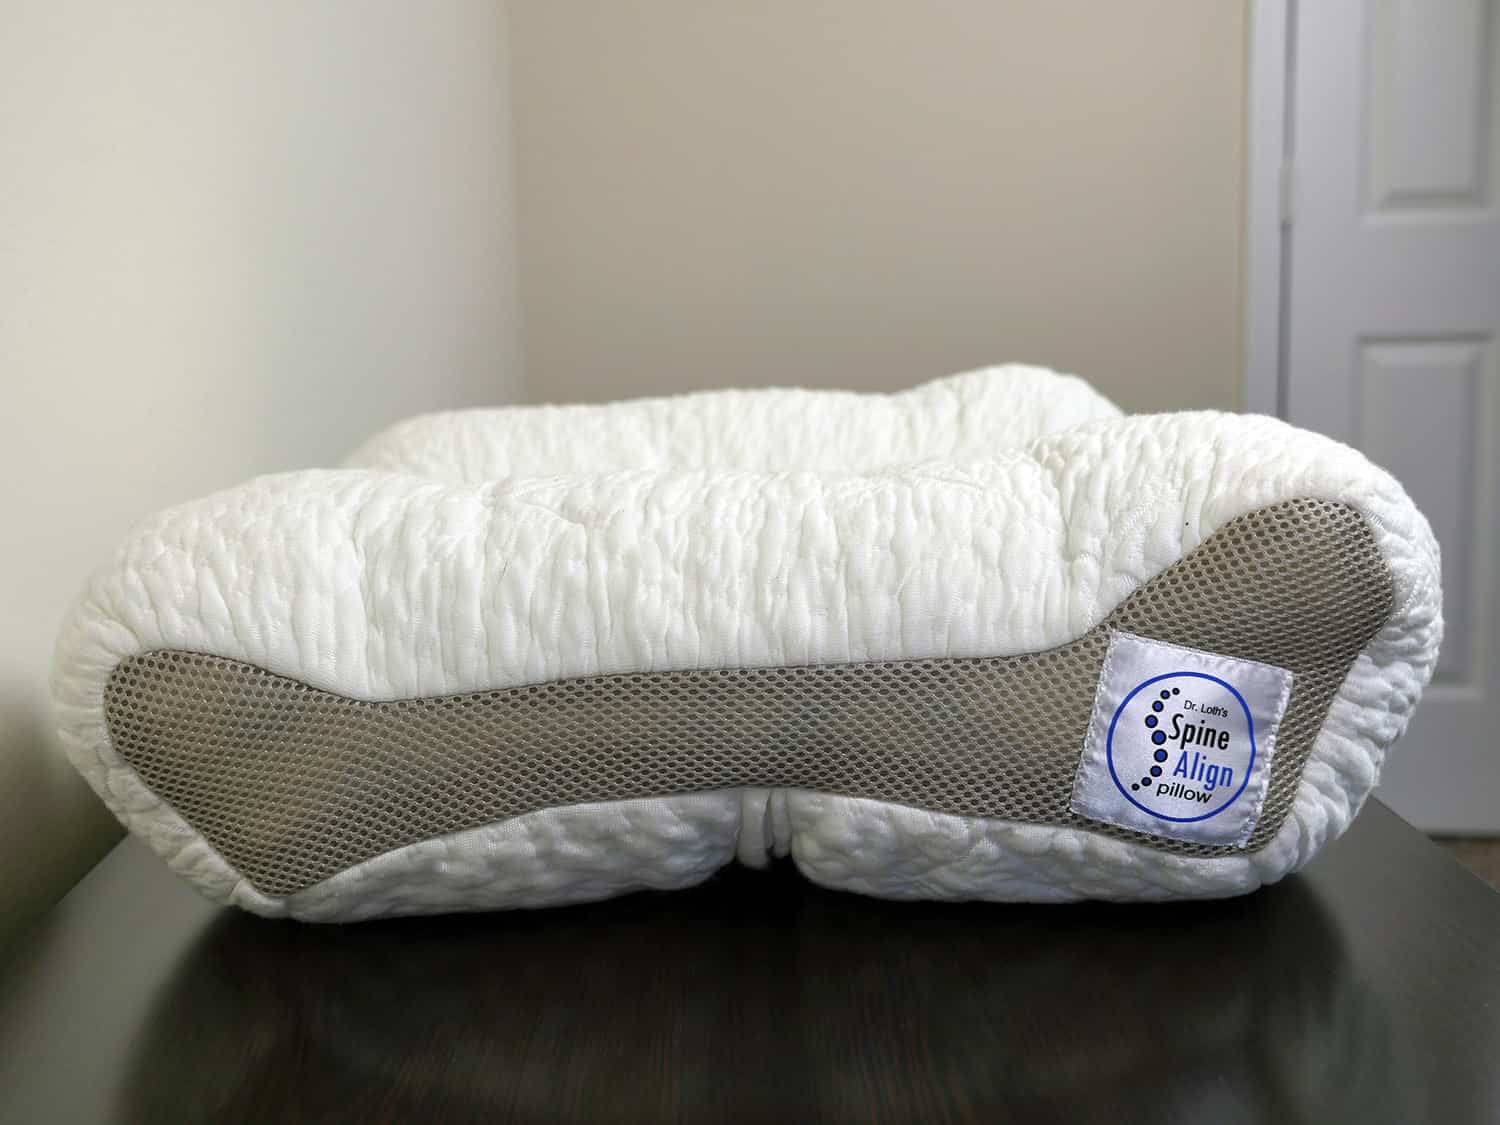 spine align pillow discount